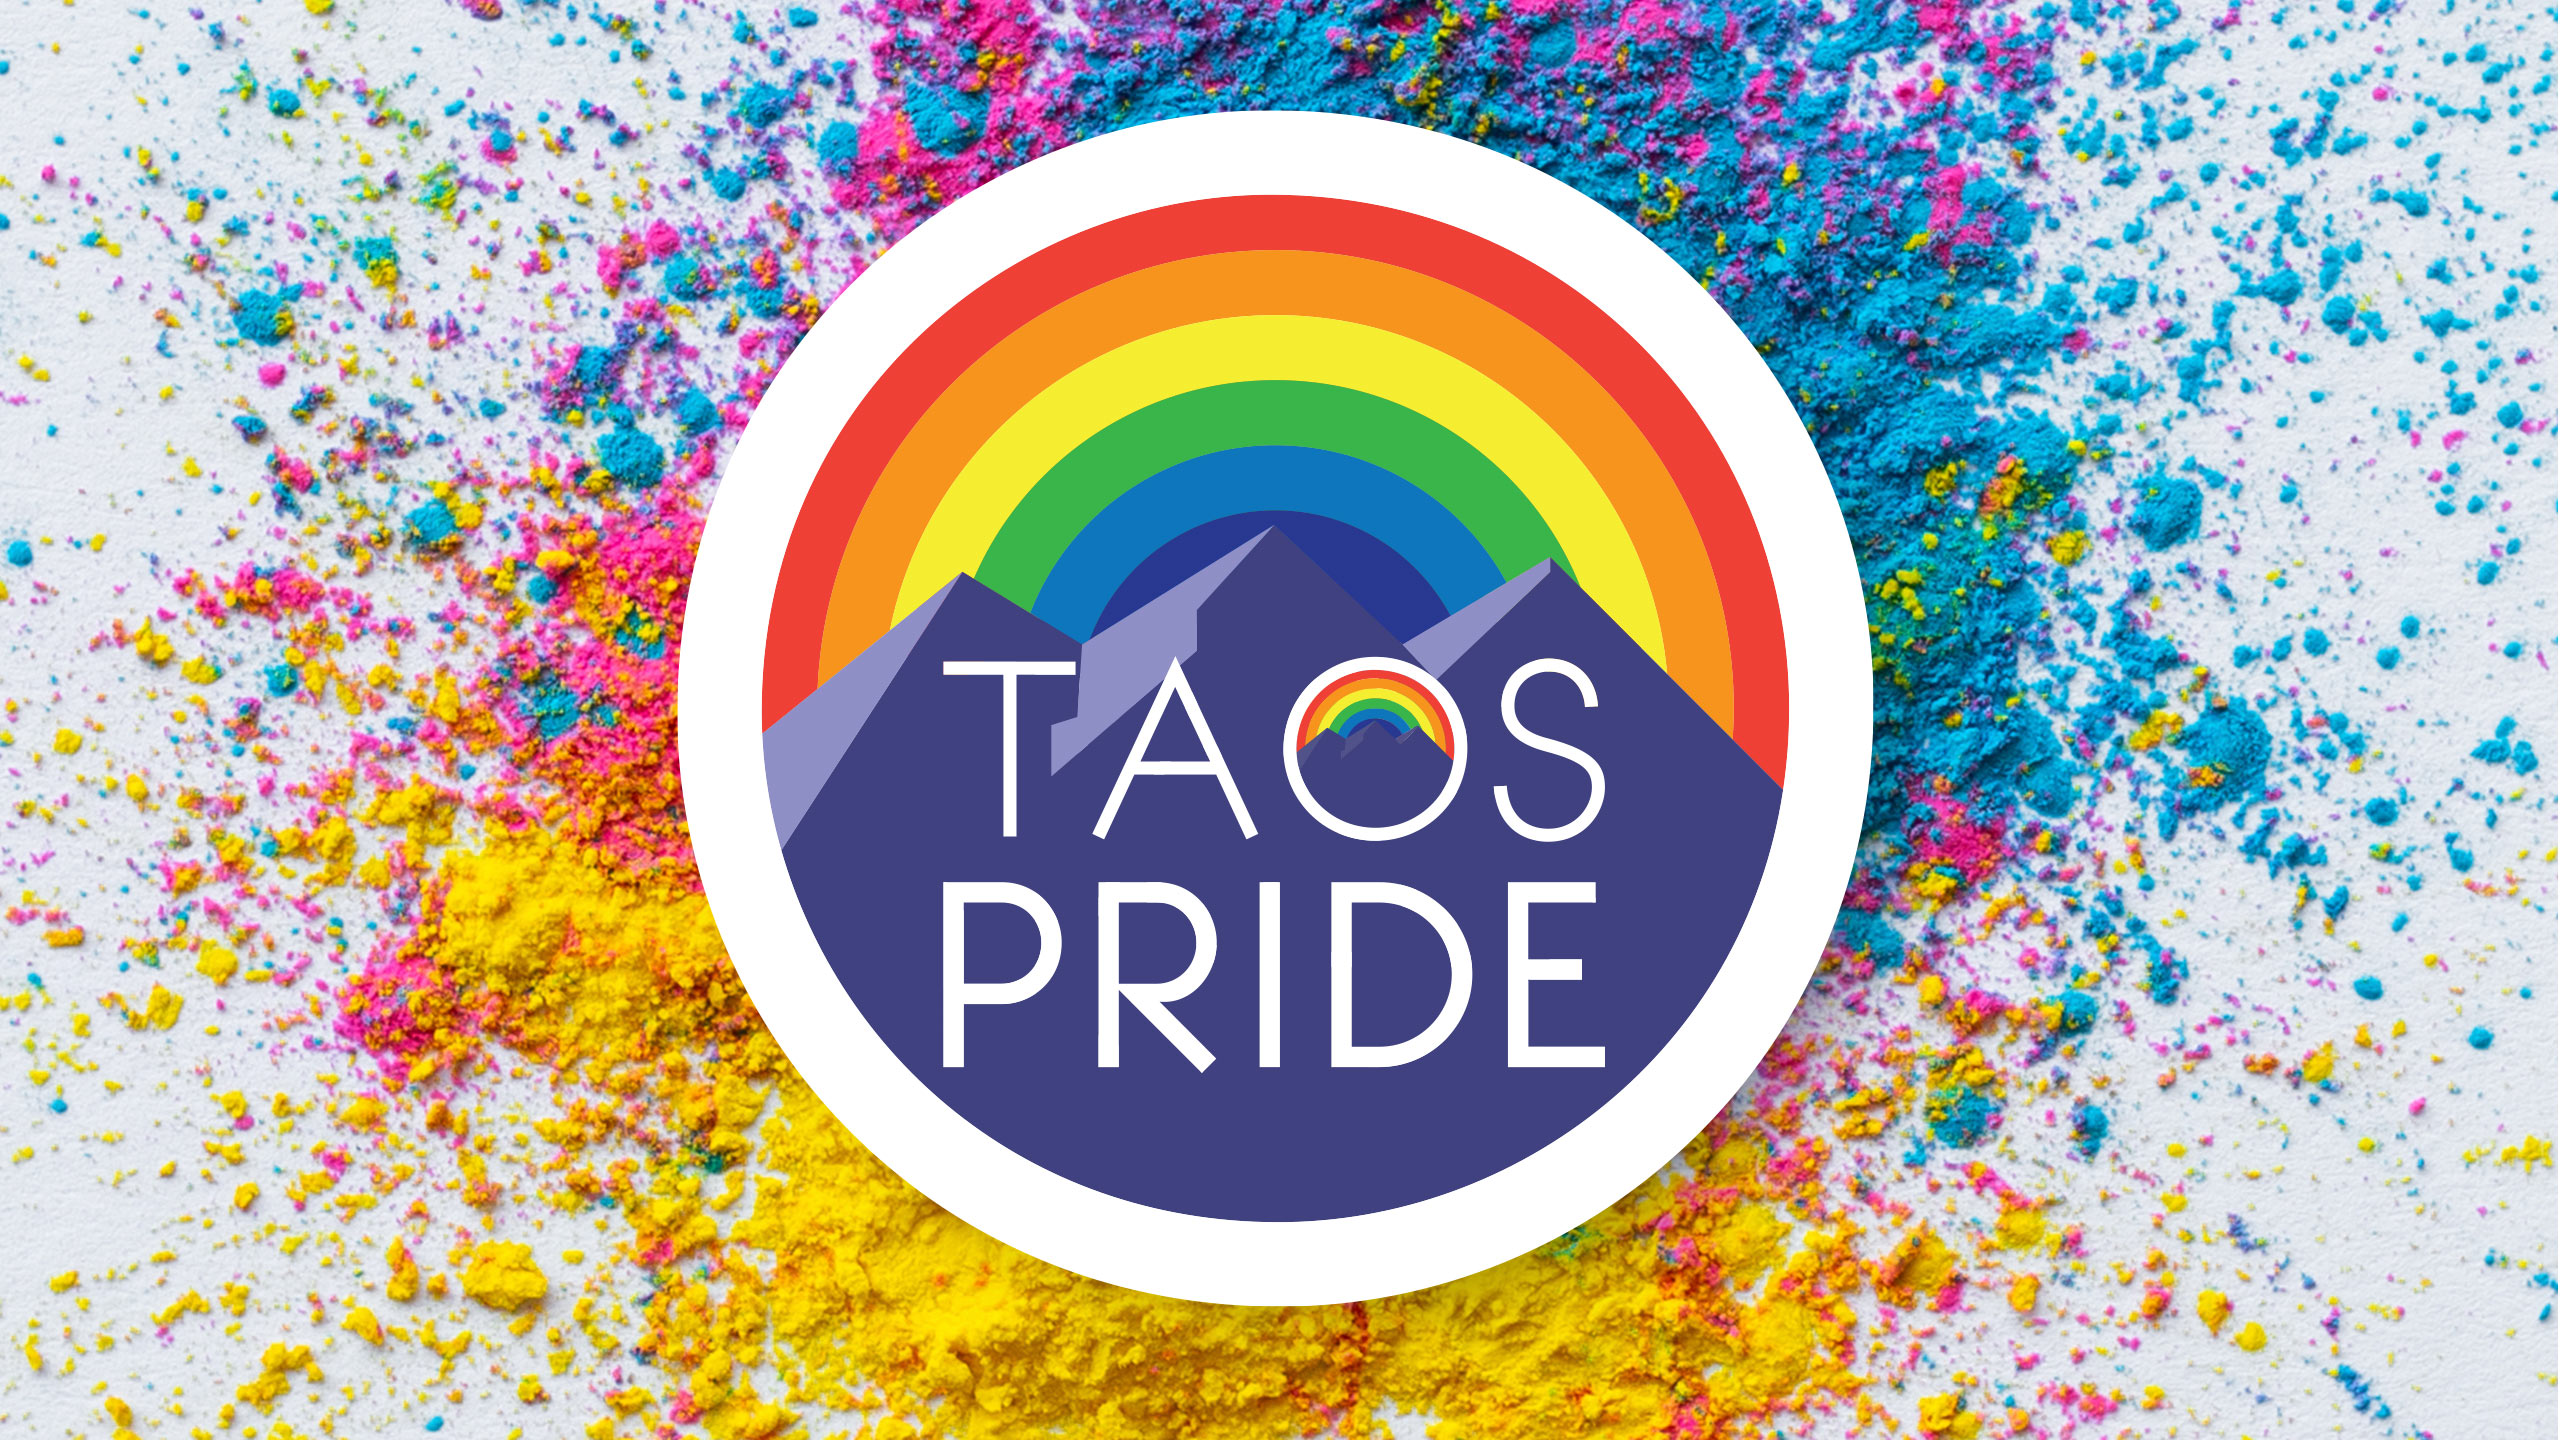 Taos Pride with colorful dust